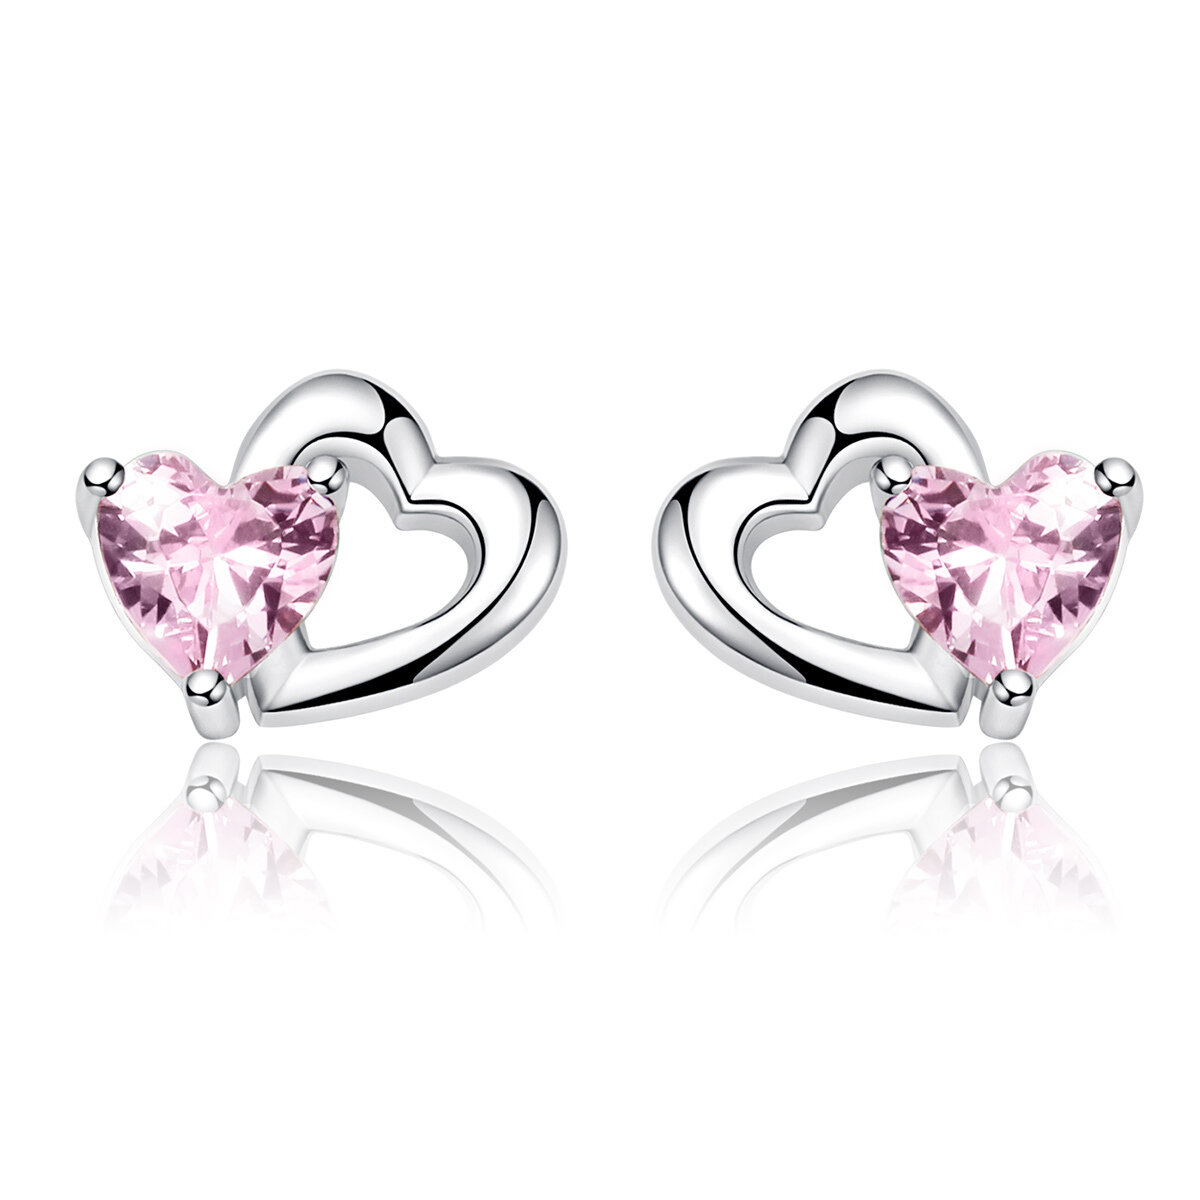 GemKing Matching Hearts S925 Sterling Silver Earrings